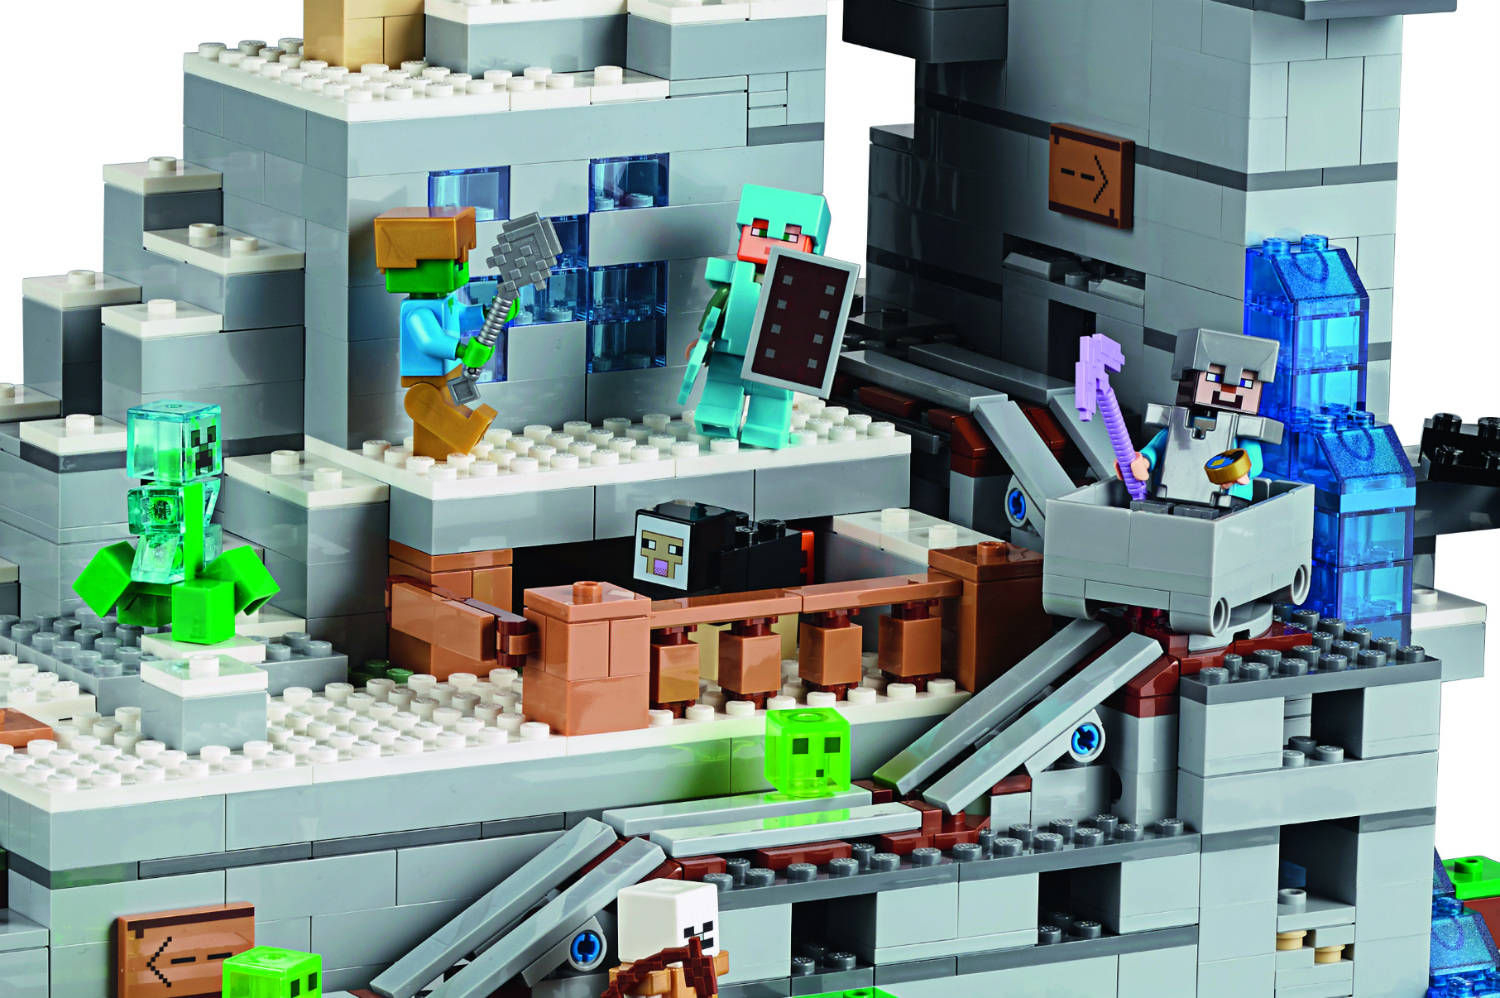 The Lego 'Minecraft' Mountain Cave is the new biggest set in town